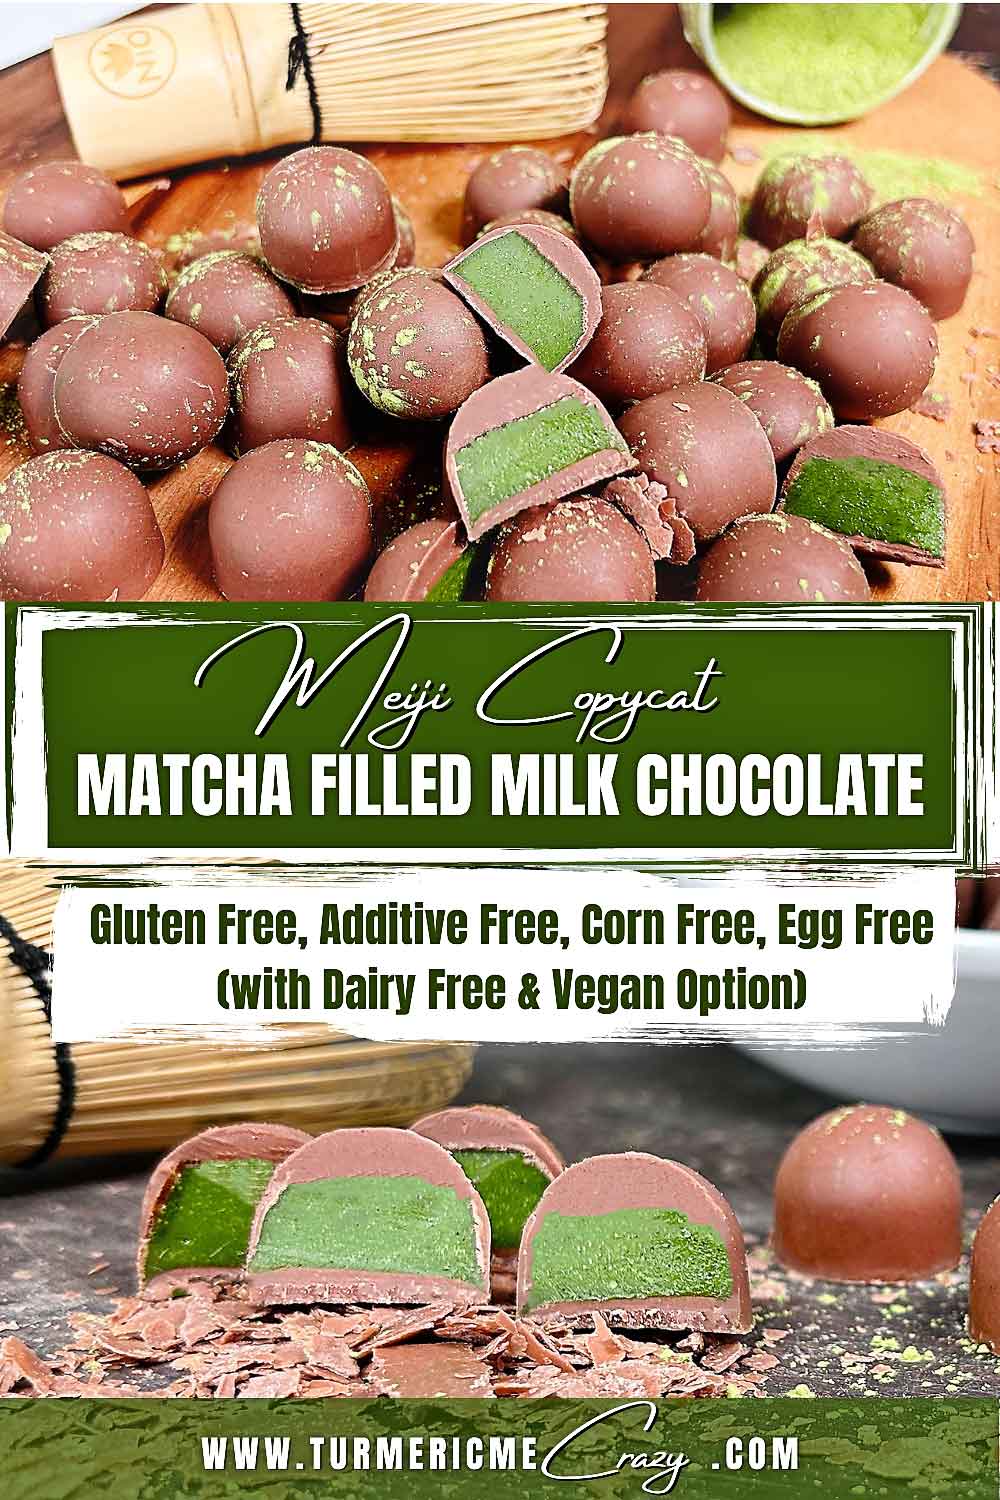 The iconic flavor of Meiji Matcha Milk Chocolate right to your kitchen with our easy DIY recipe. If you're a fan of the delightful combination of creamy milk chocolate and earthy matcha, then you're in for a treat! #meiji #matcha #bestmatcha #matcharecipe #chocolaterecipe #homemadechocolate #dessert #veganchocolate